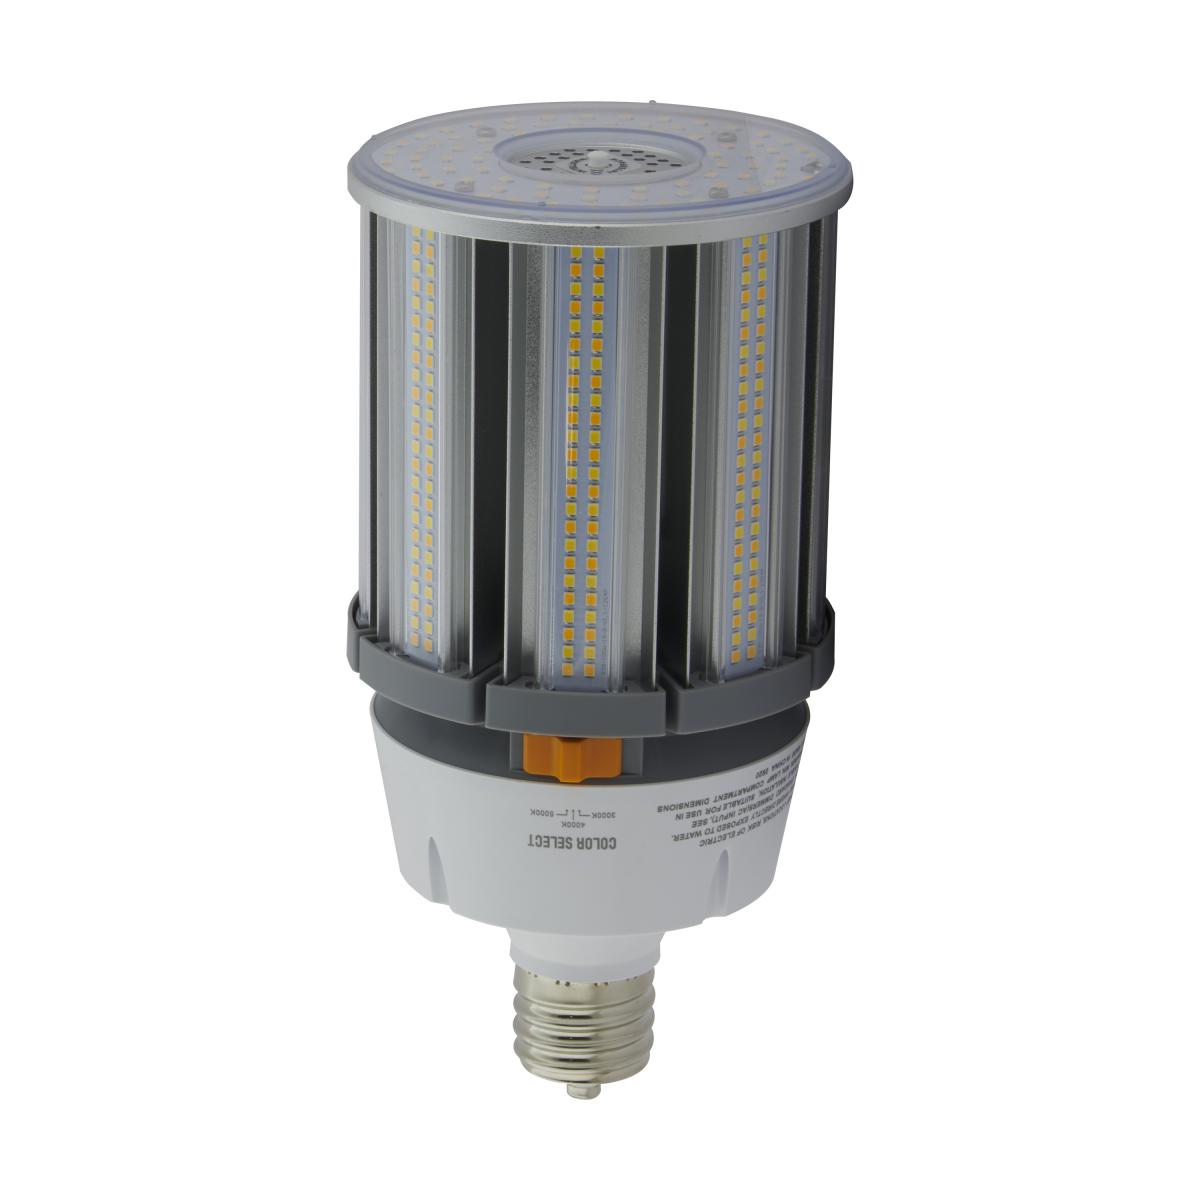 Satco S13144 100 Watt LED HID Replacement CCT Selectable Mogul extended base 100-277 Volt - NOW S23144